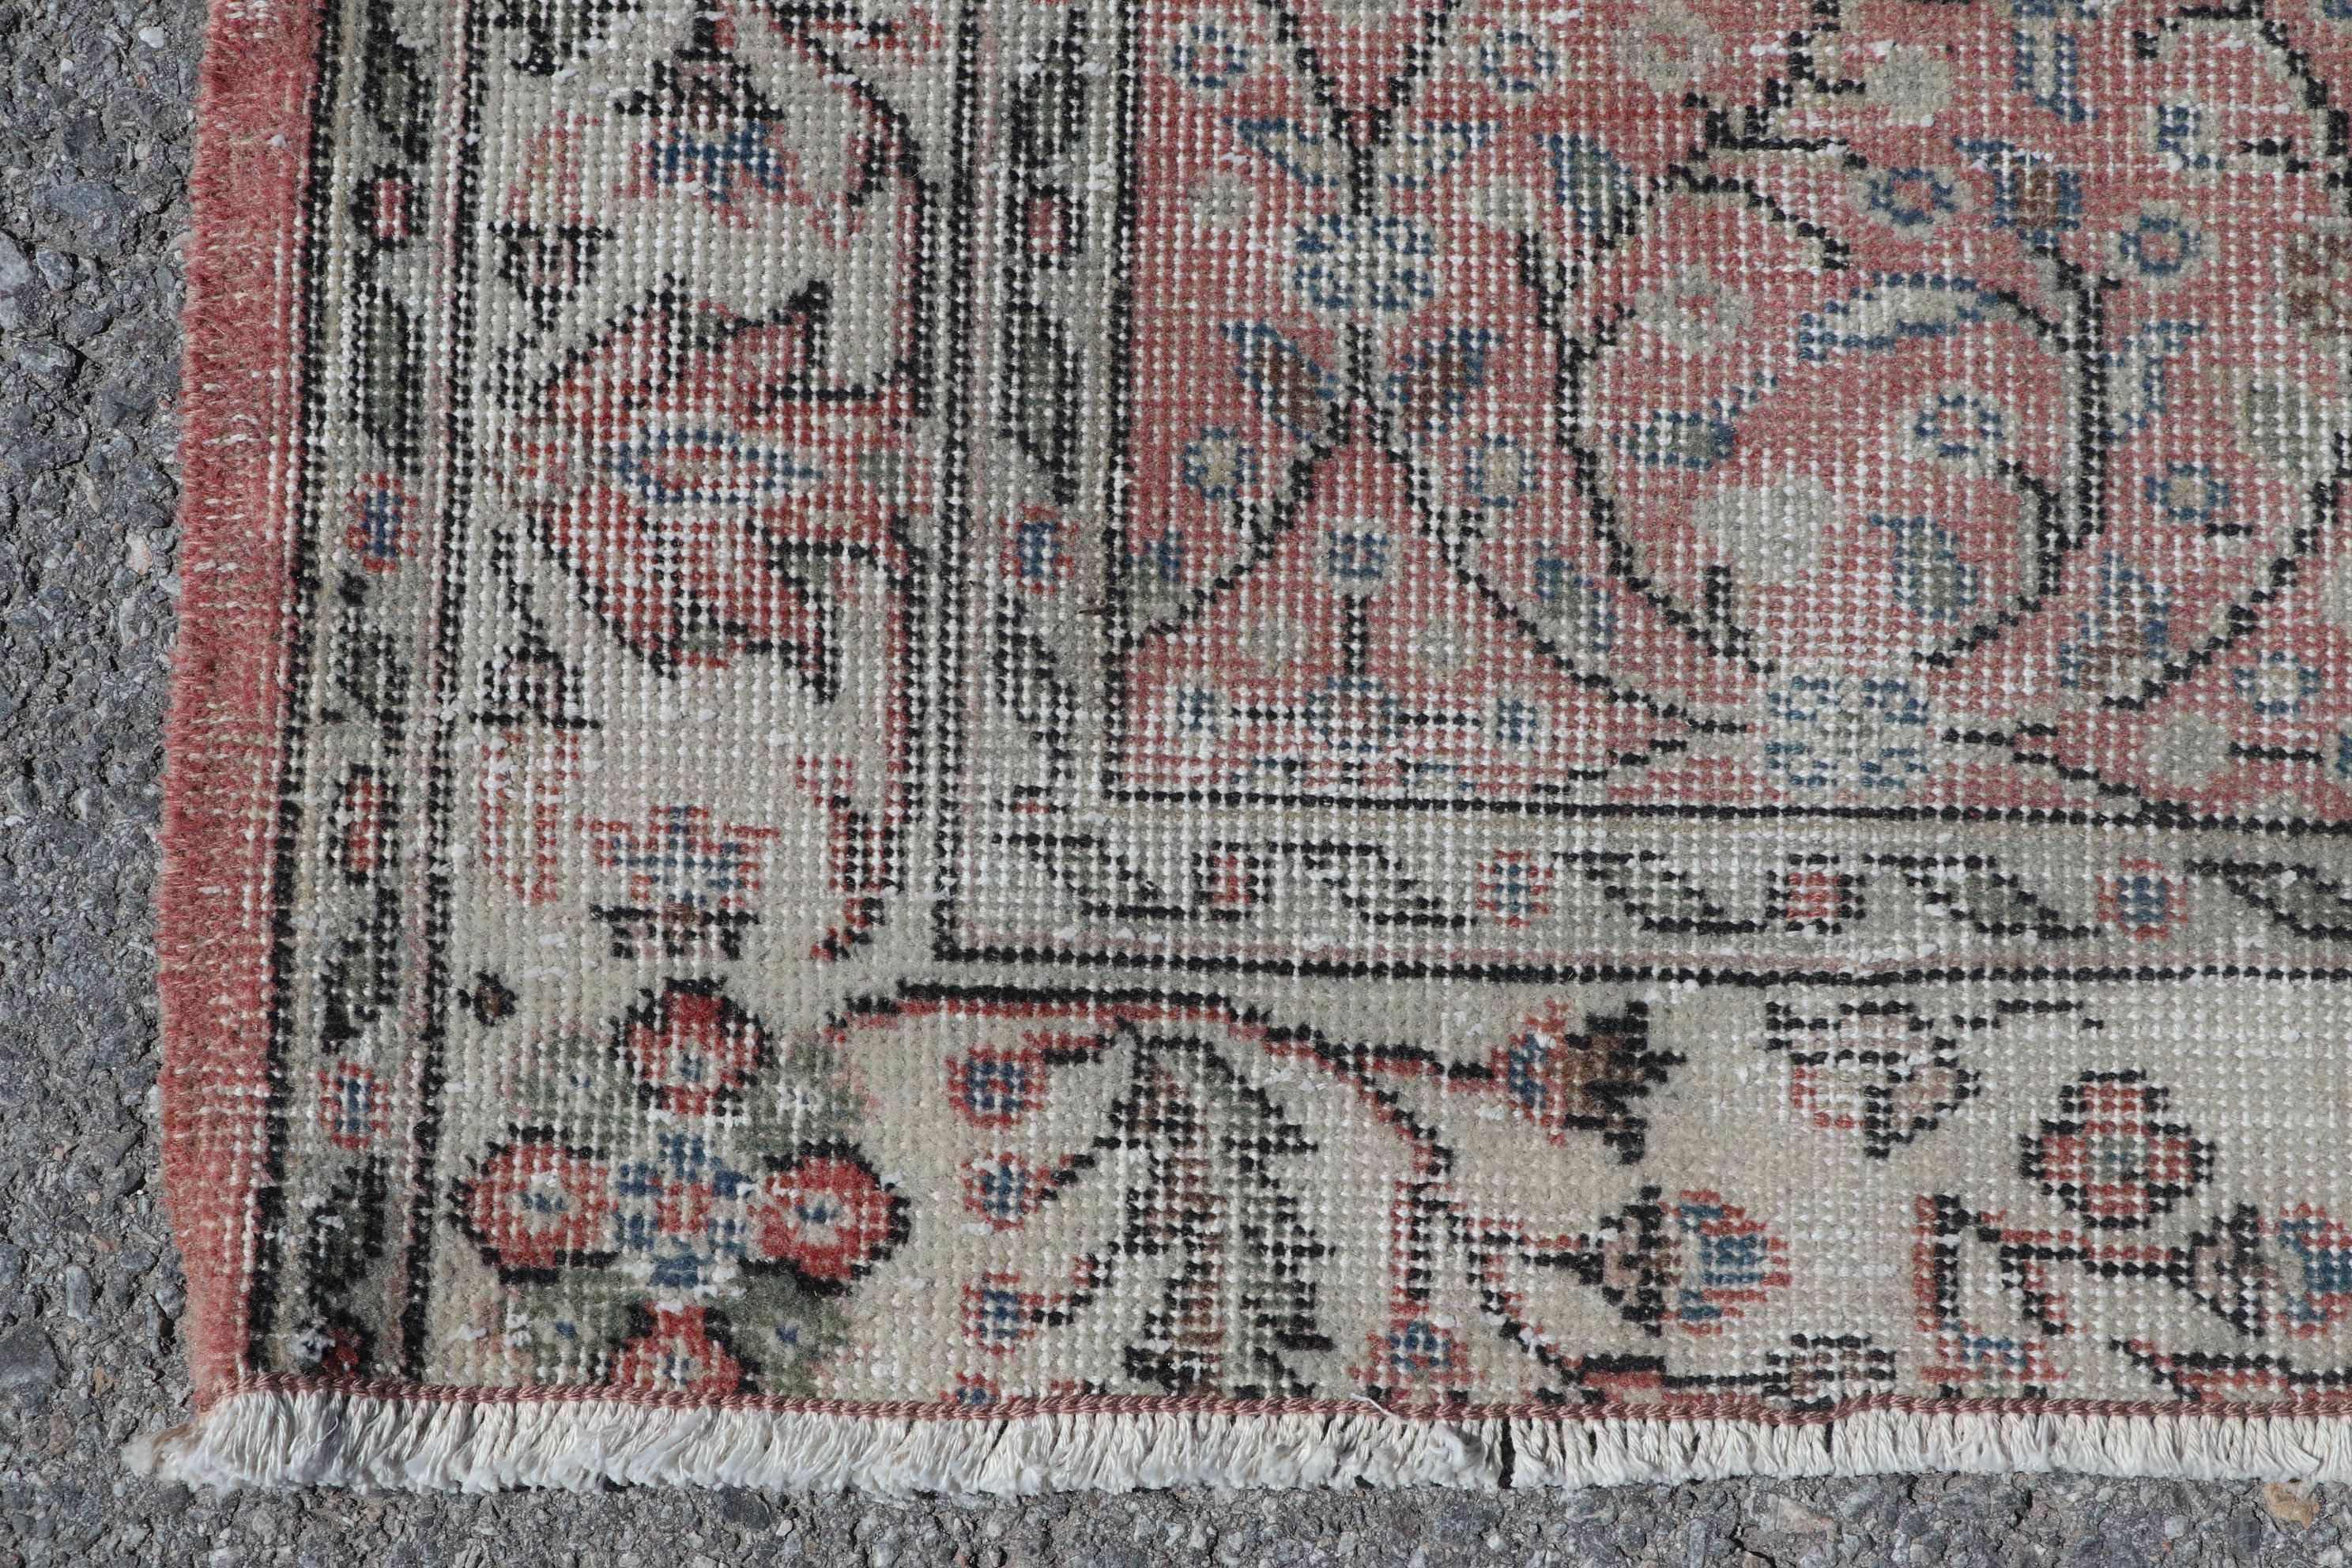 Entry Rug, Vintage Rug, Turkish Rug, Red Anatolian Rugs, 3.8x6.3 ft Accent Rug, Rugs for Entry, Anatolian Rugs, Kitchen Rugs